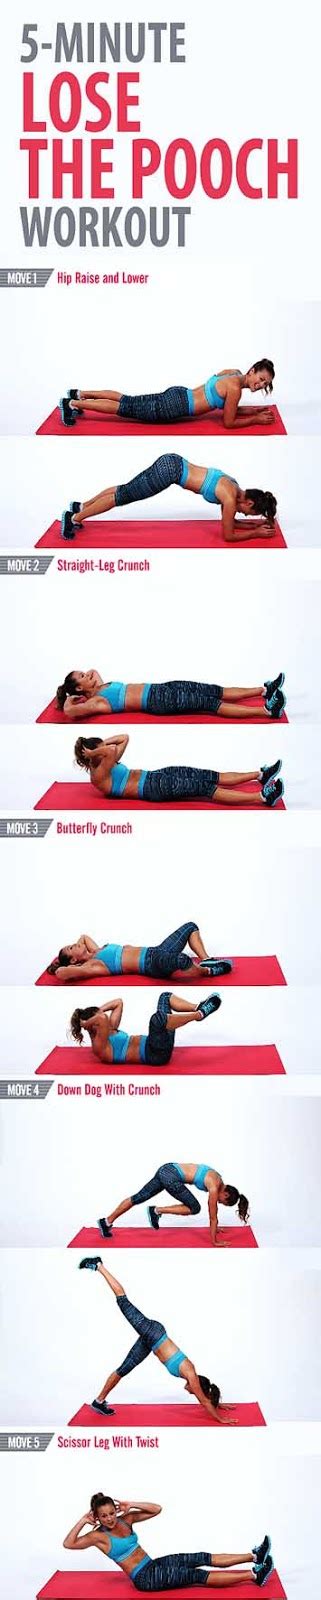 5 Minute Lose The Pooch Workout